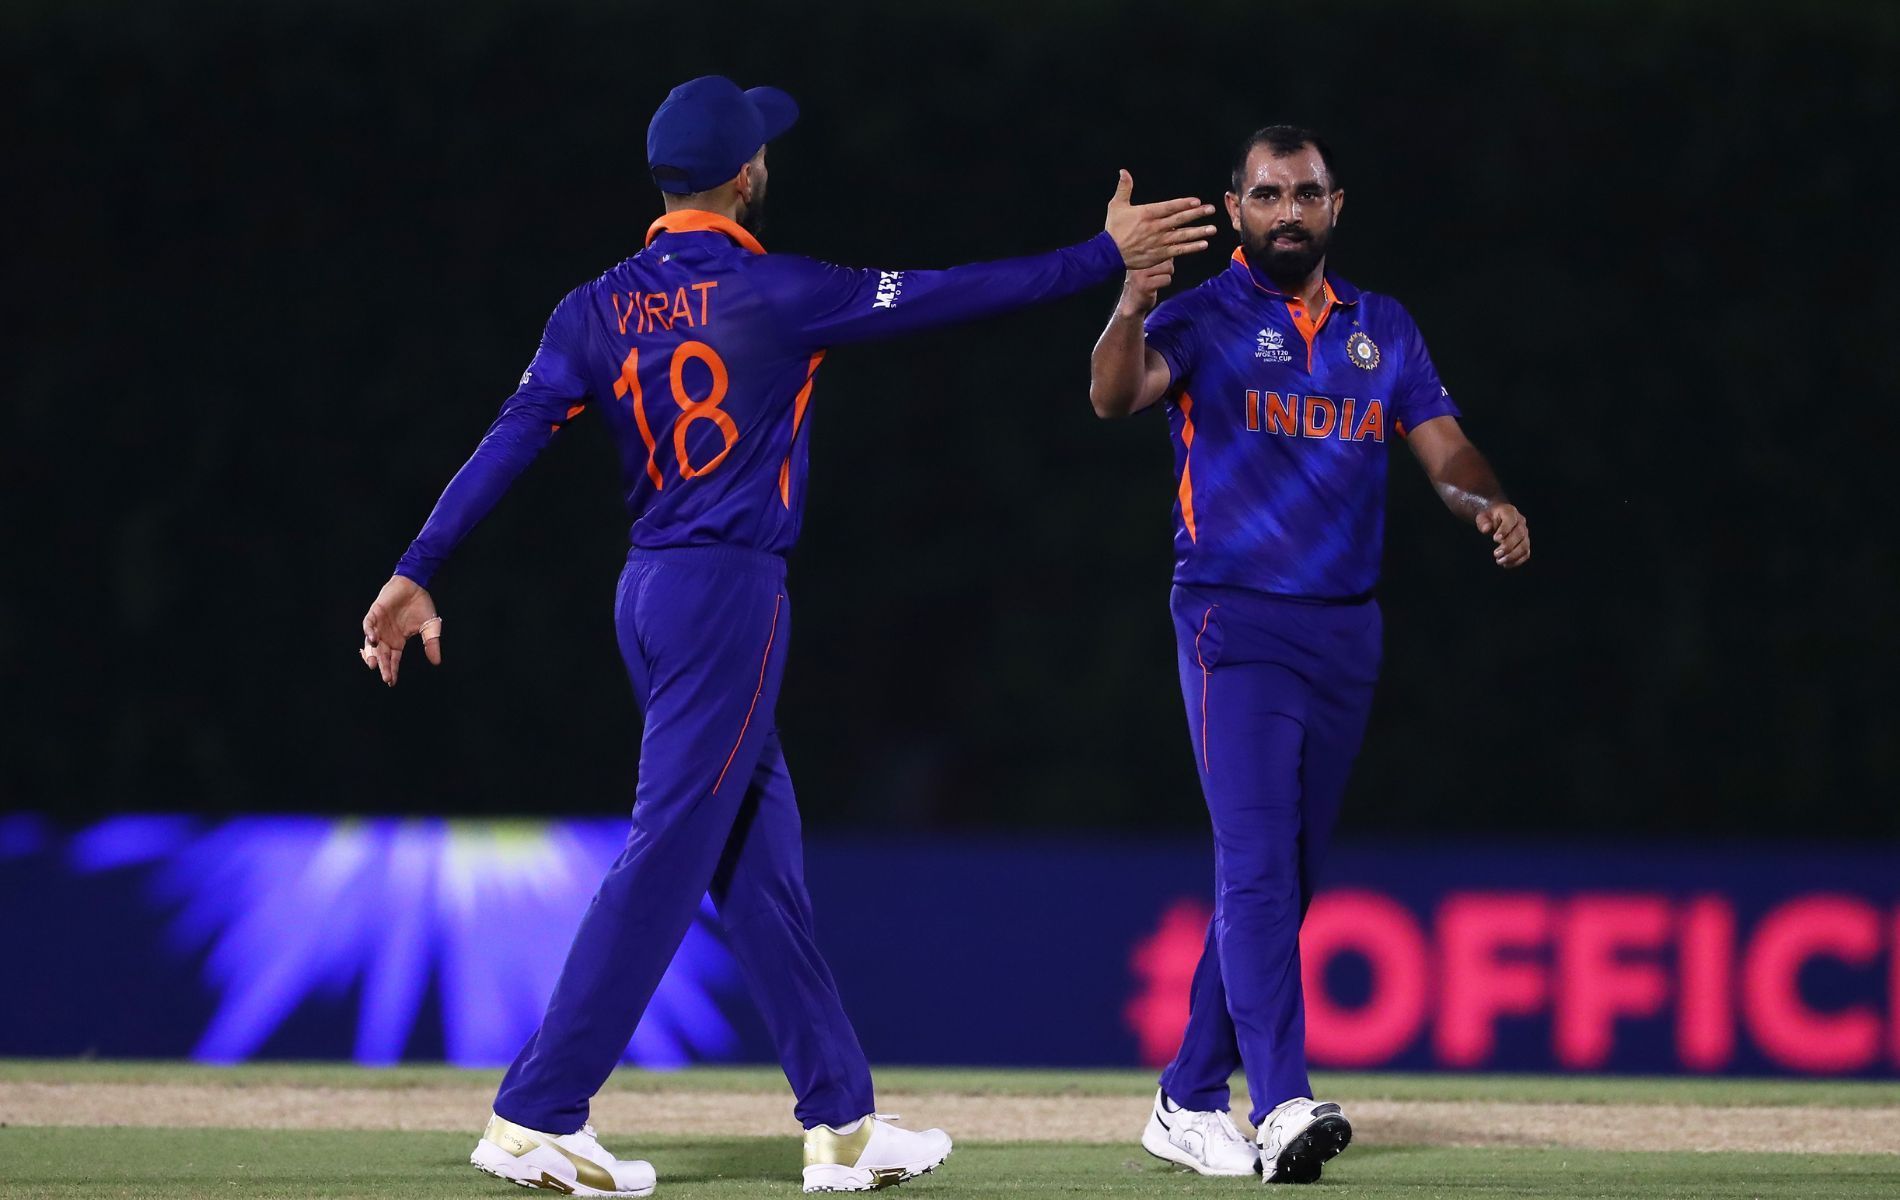 T20 World Cup: Mohammed Shami picked three wickets against England in a warm-up match.